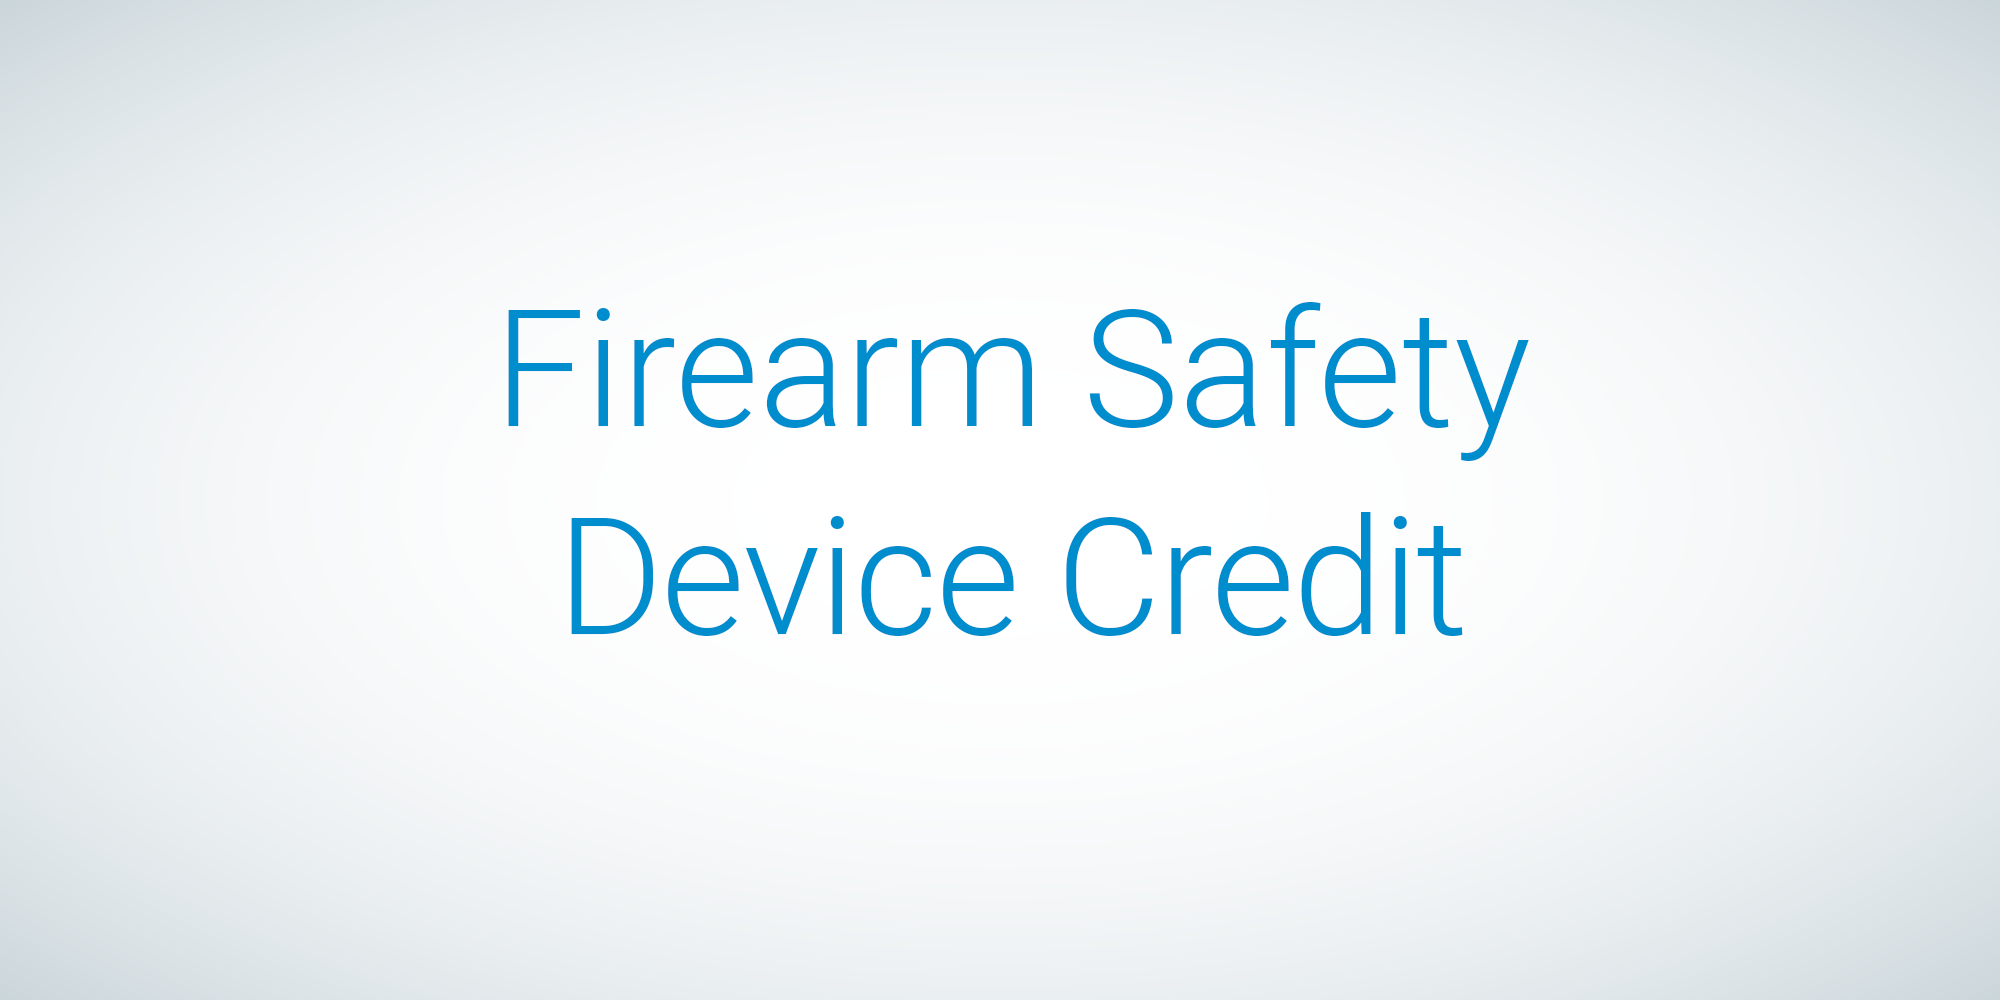 text "Firearm Safety Device Credit"